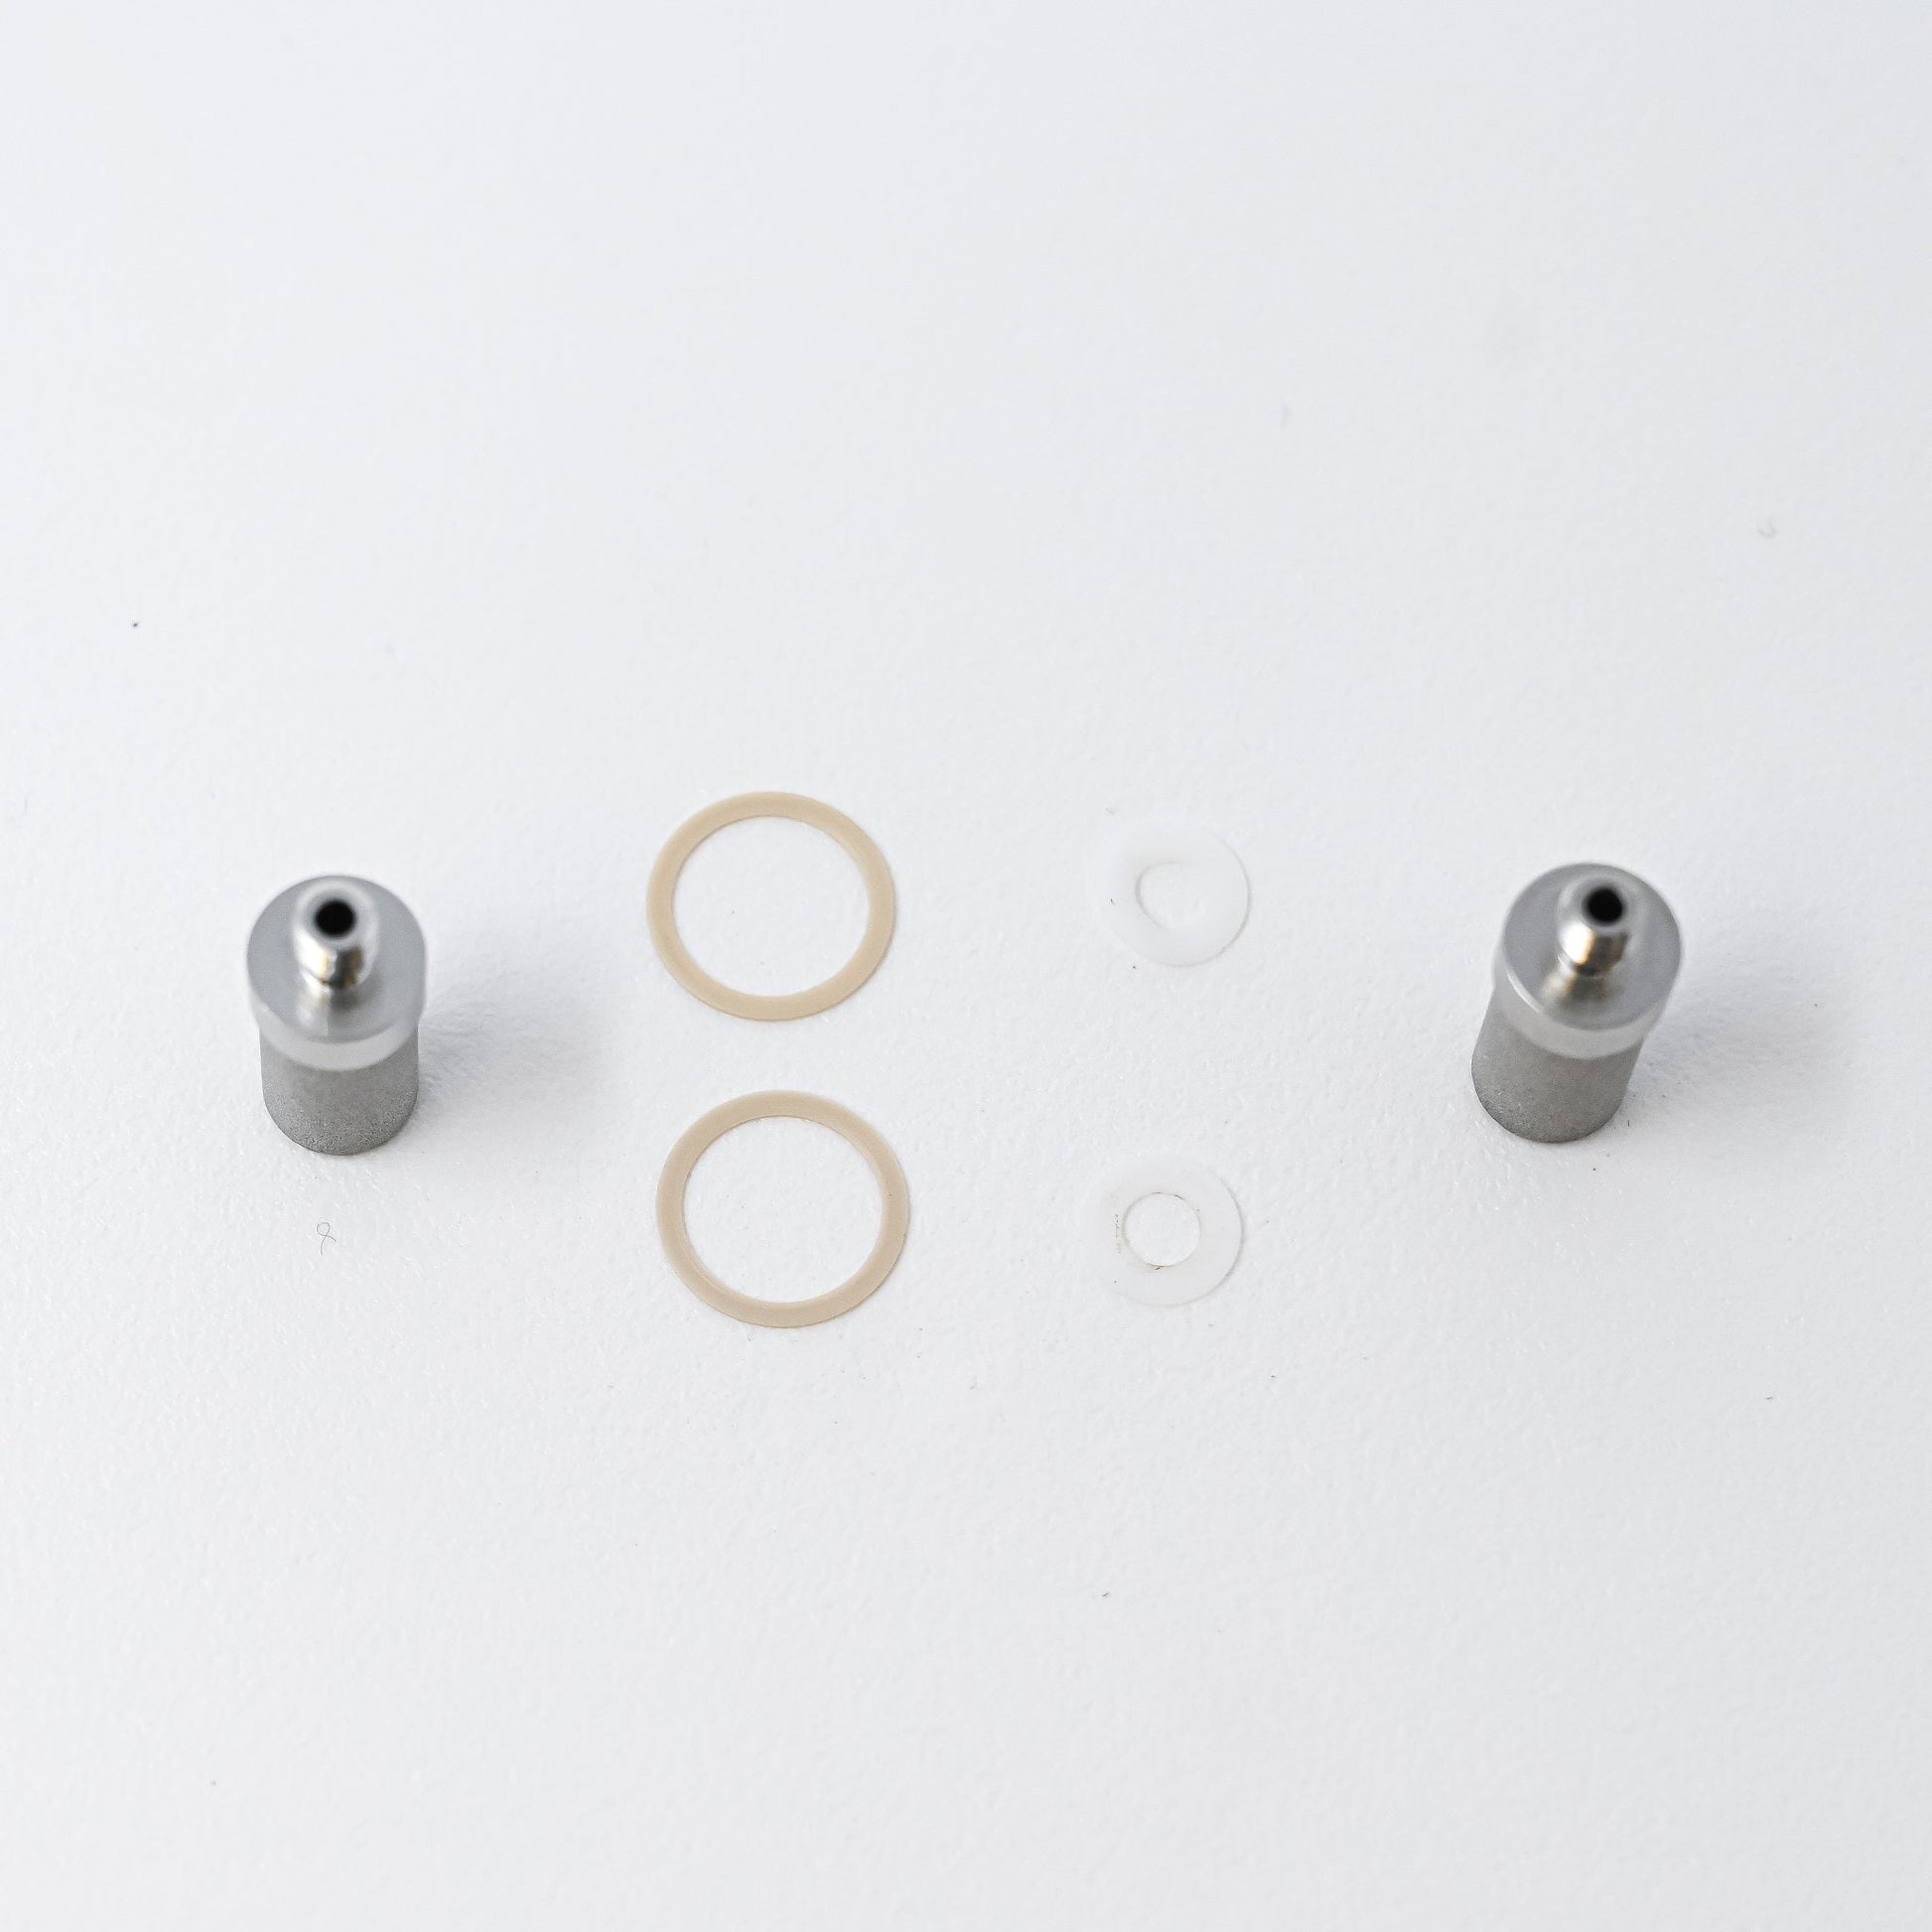 Cylindrical filter element with o-rings and gaskets.